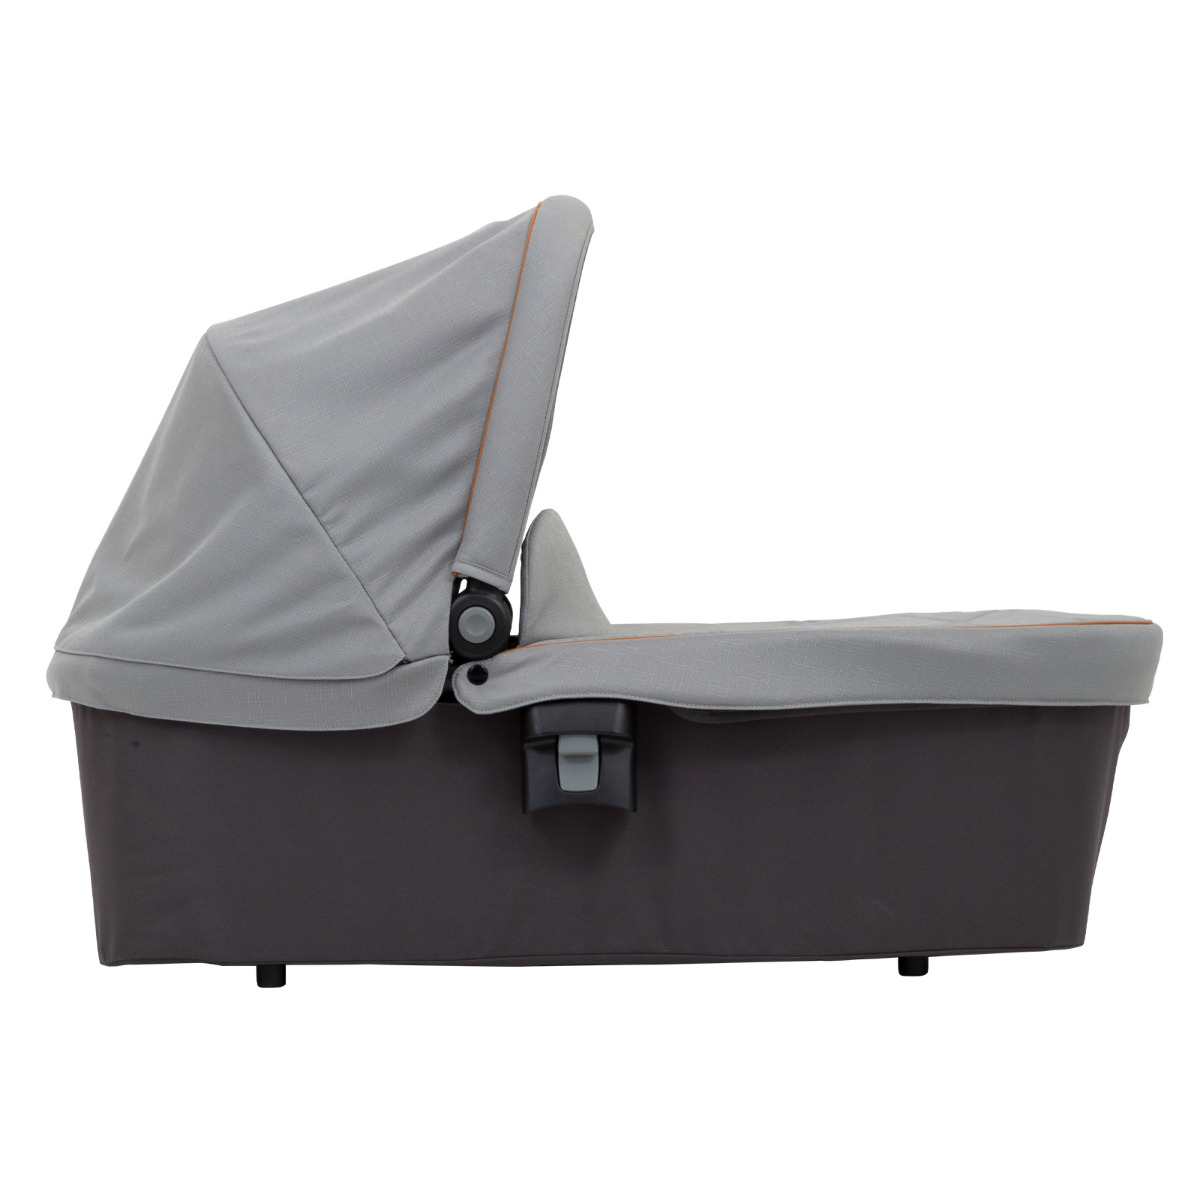 Graco Near2Me™ carrycot with apron three quarter angle